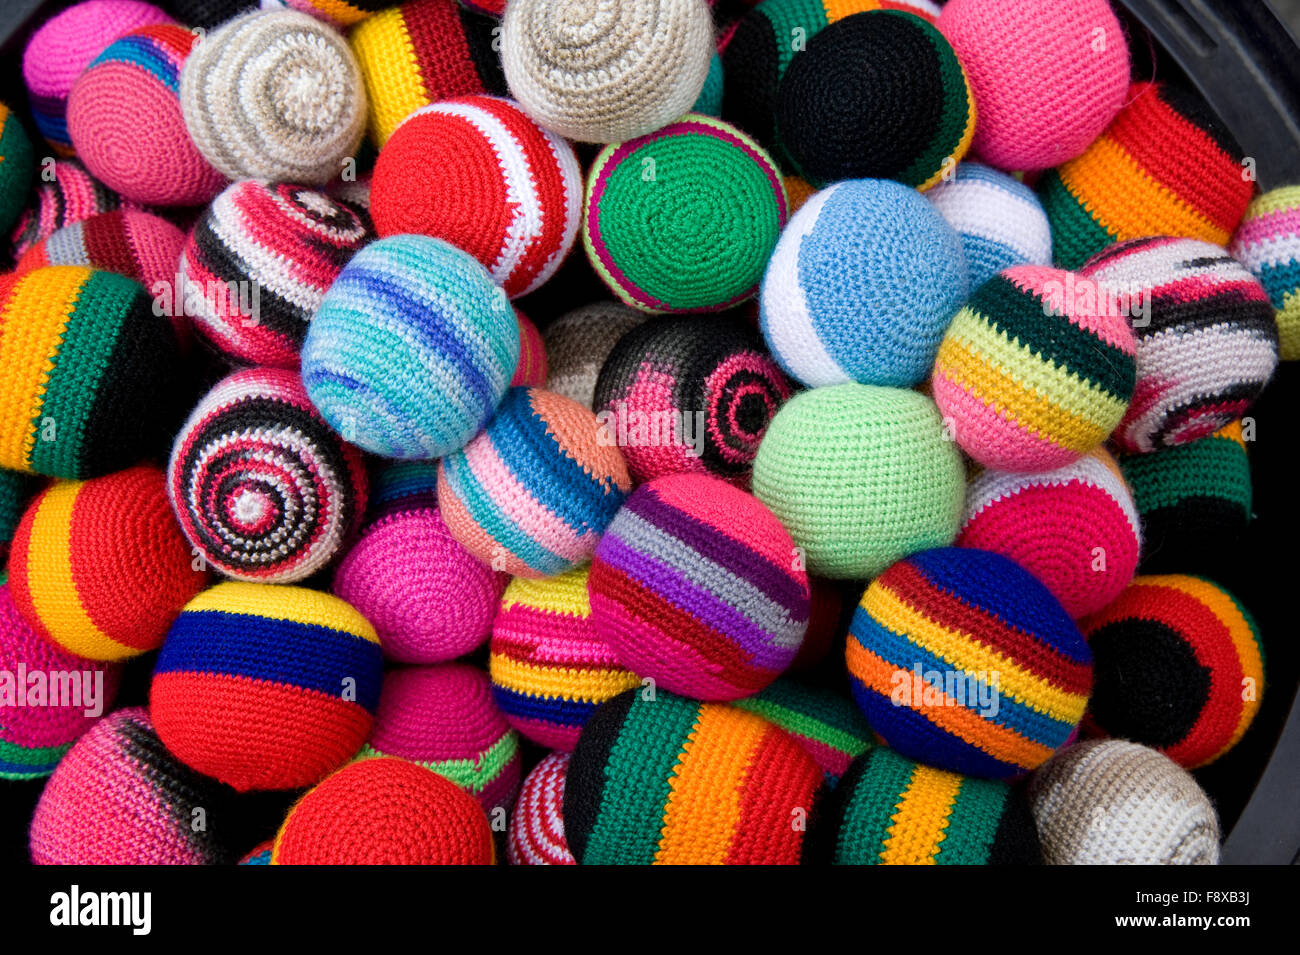 Colorful fabric balls on display in marketplace in Otavalo, Ecuador, South America Stock Photo